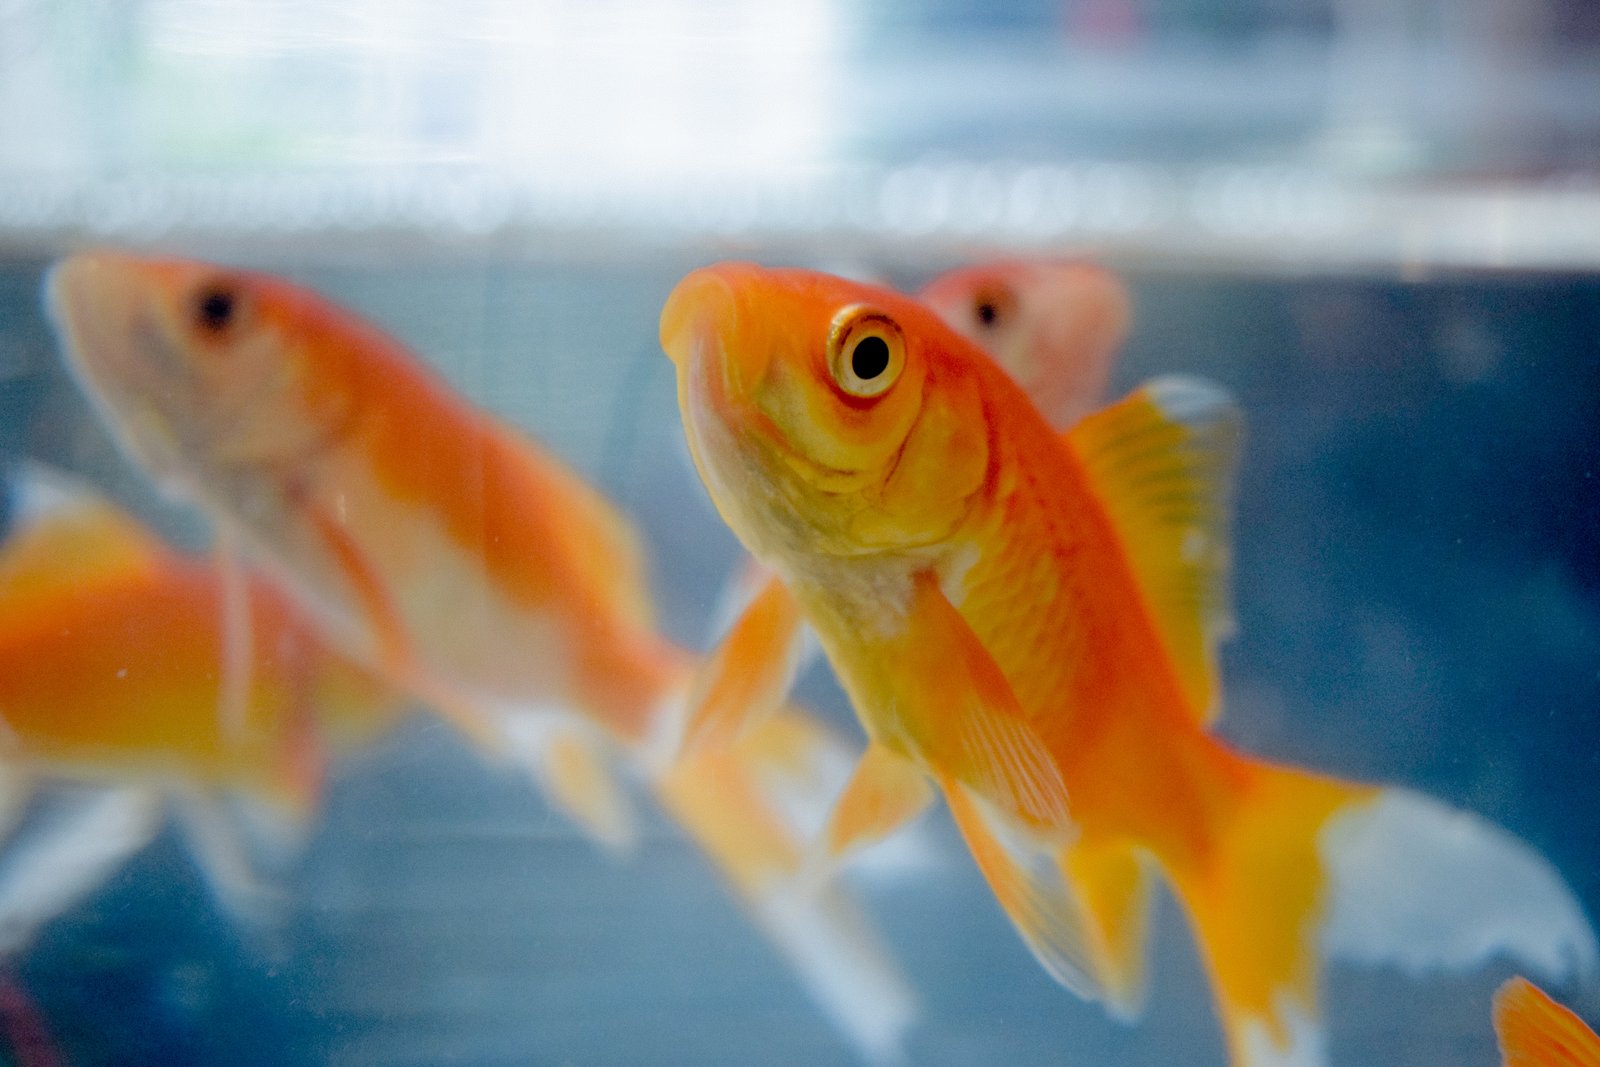 Ammonia and Goldfish: What You Need to Know